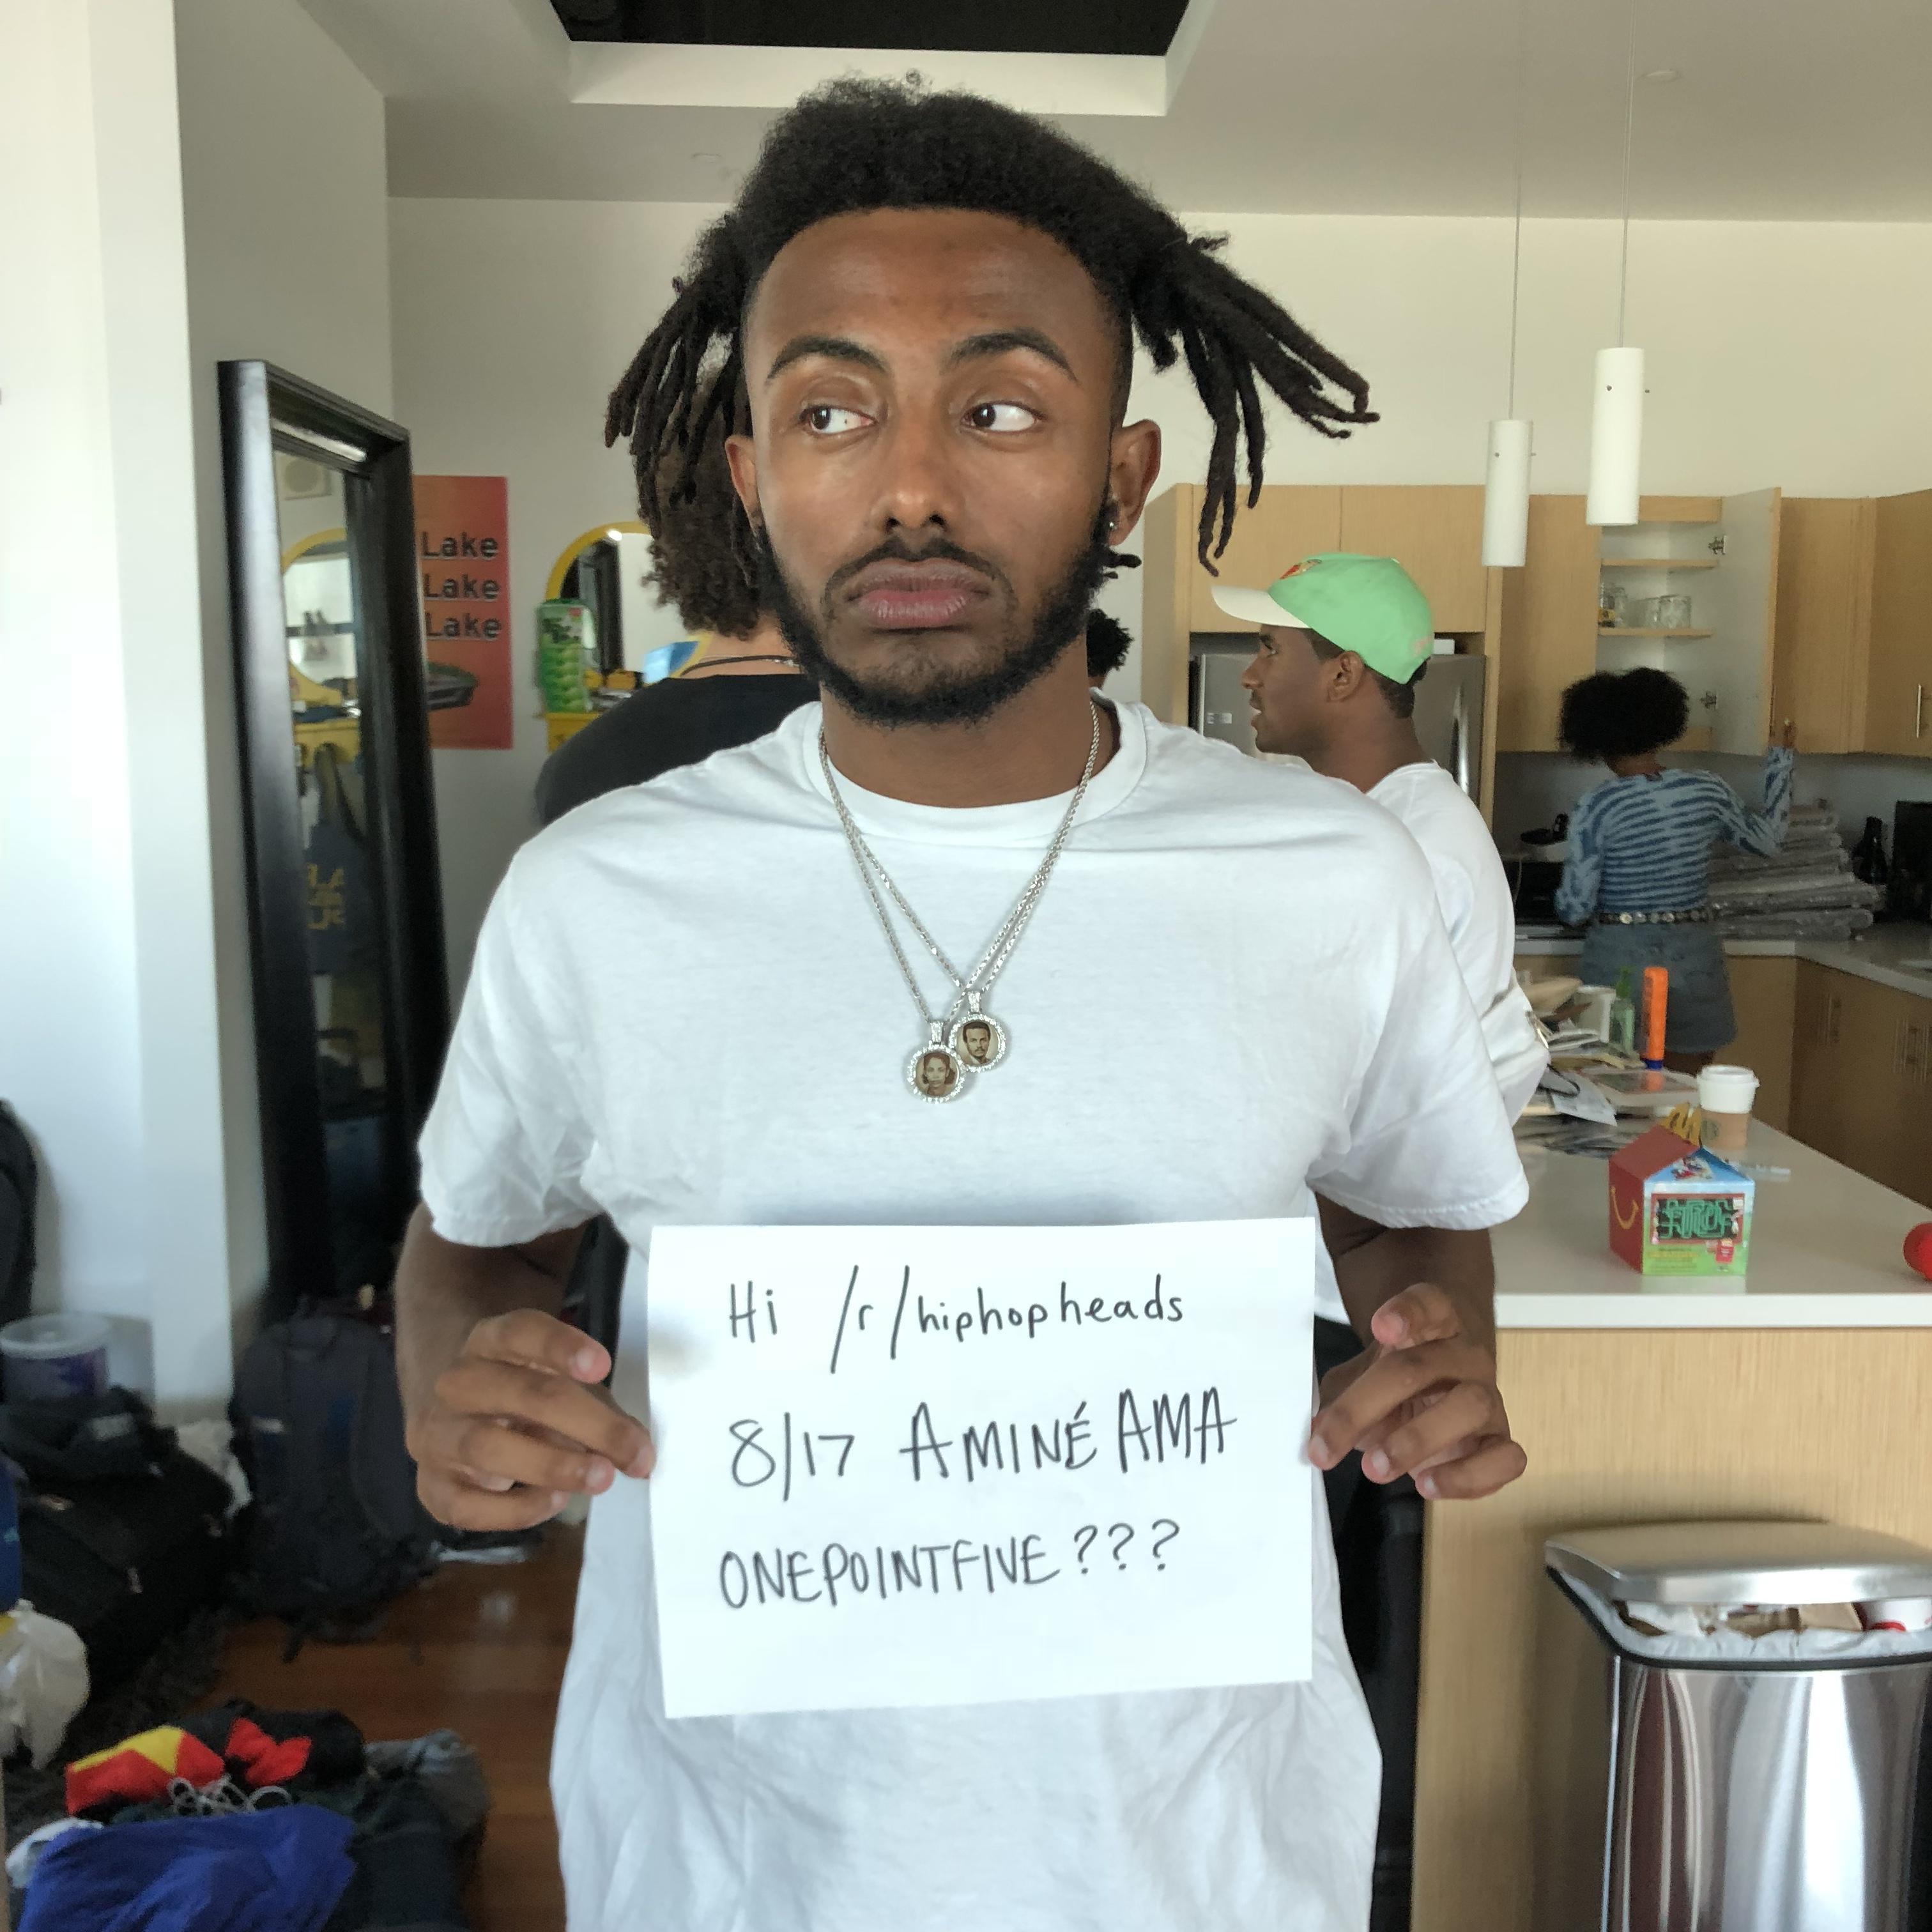 Hey this is Aminé, my new EpLpMixtapeAlbum 'ONEPOINTFIVE' is